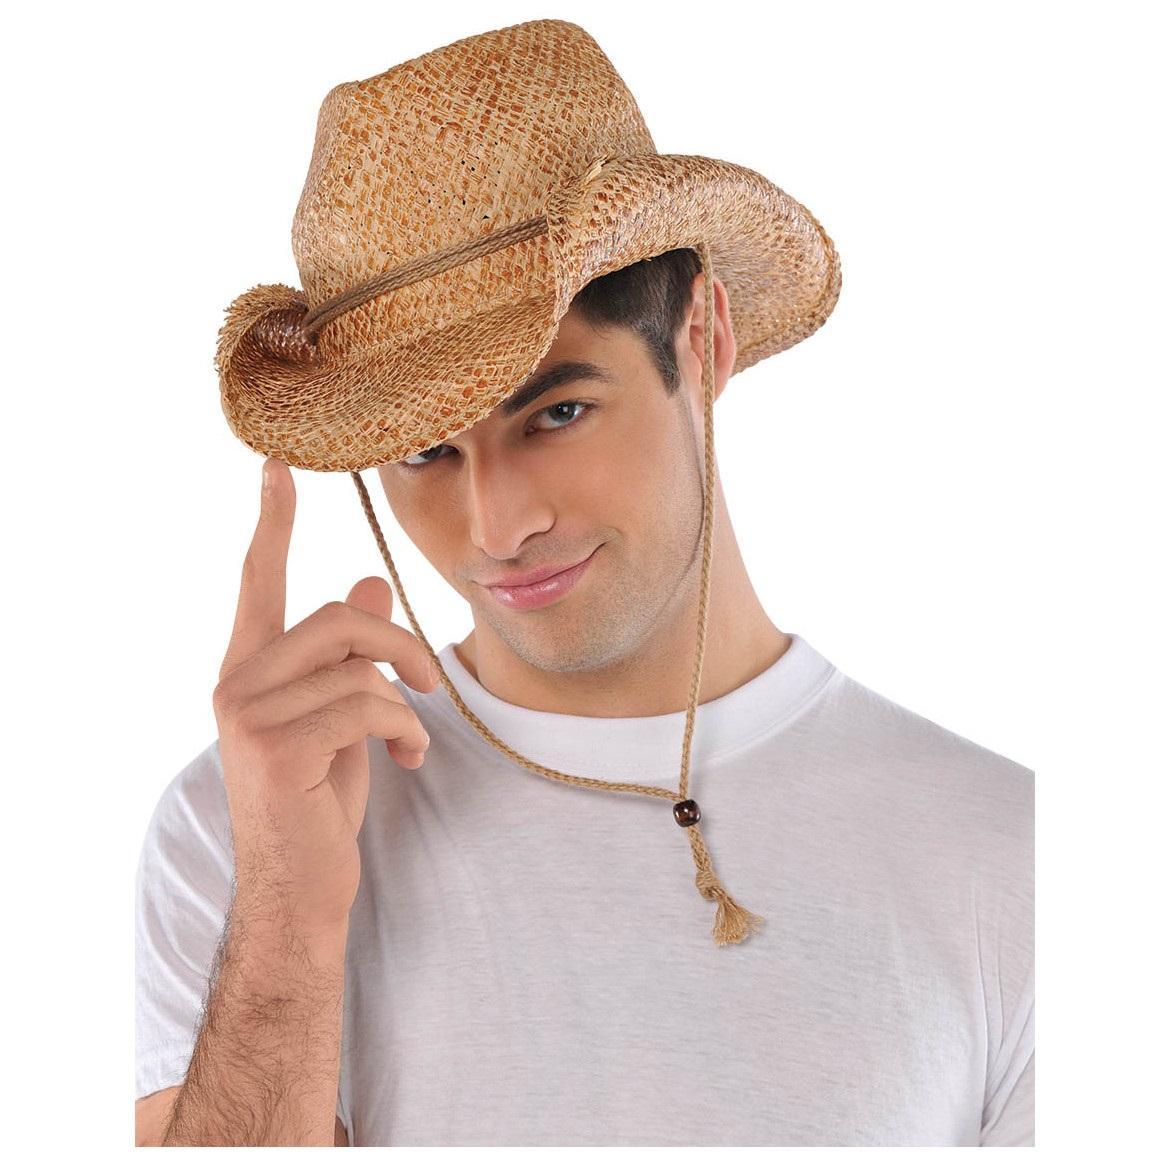 Cowboy Straw Hat Costumes & Apparel - Party Centre - Party Centre